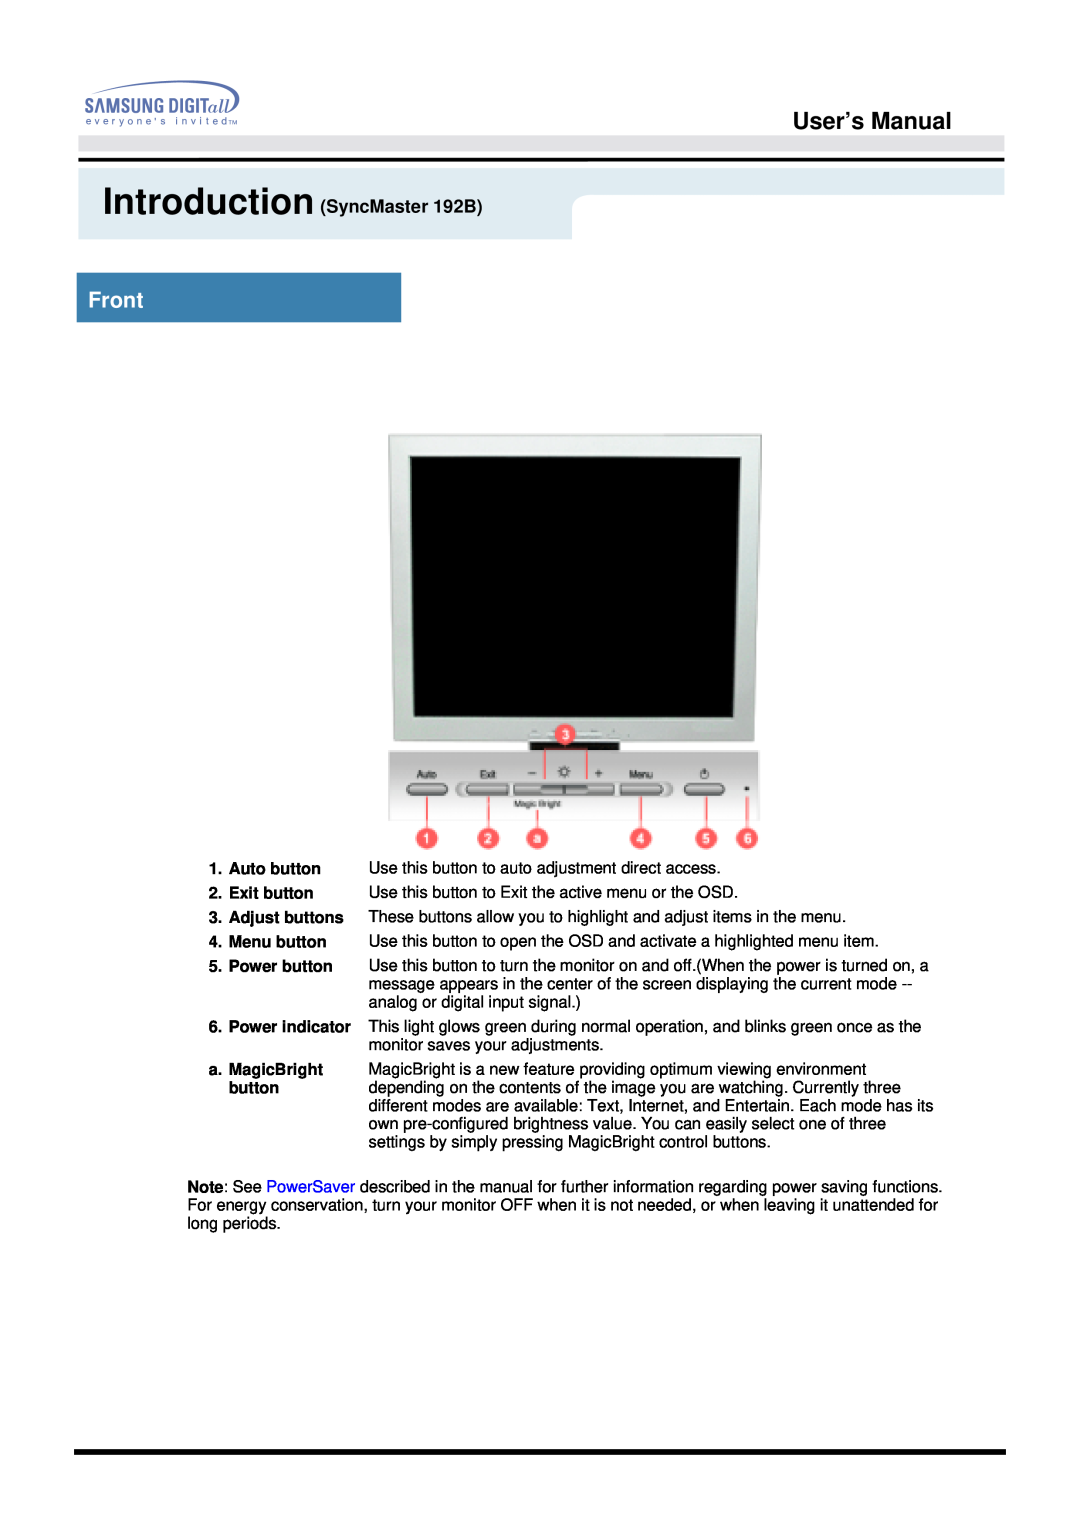 Samsung 192T manual Front, User’s Manual, Introduction SyncMaster 192B 